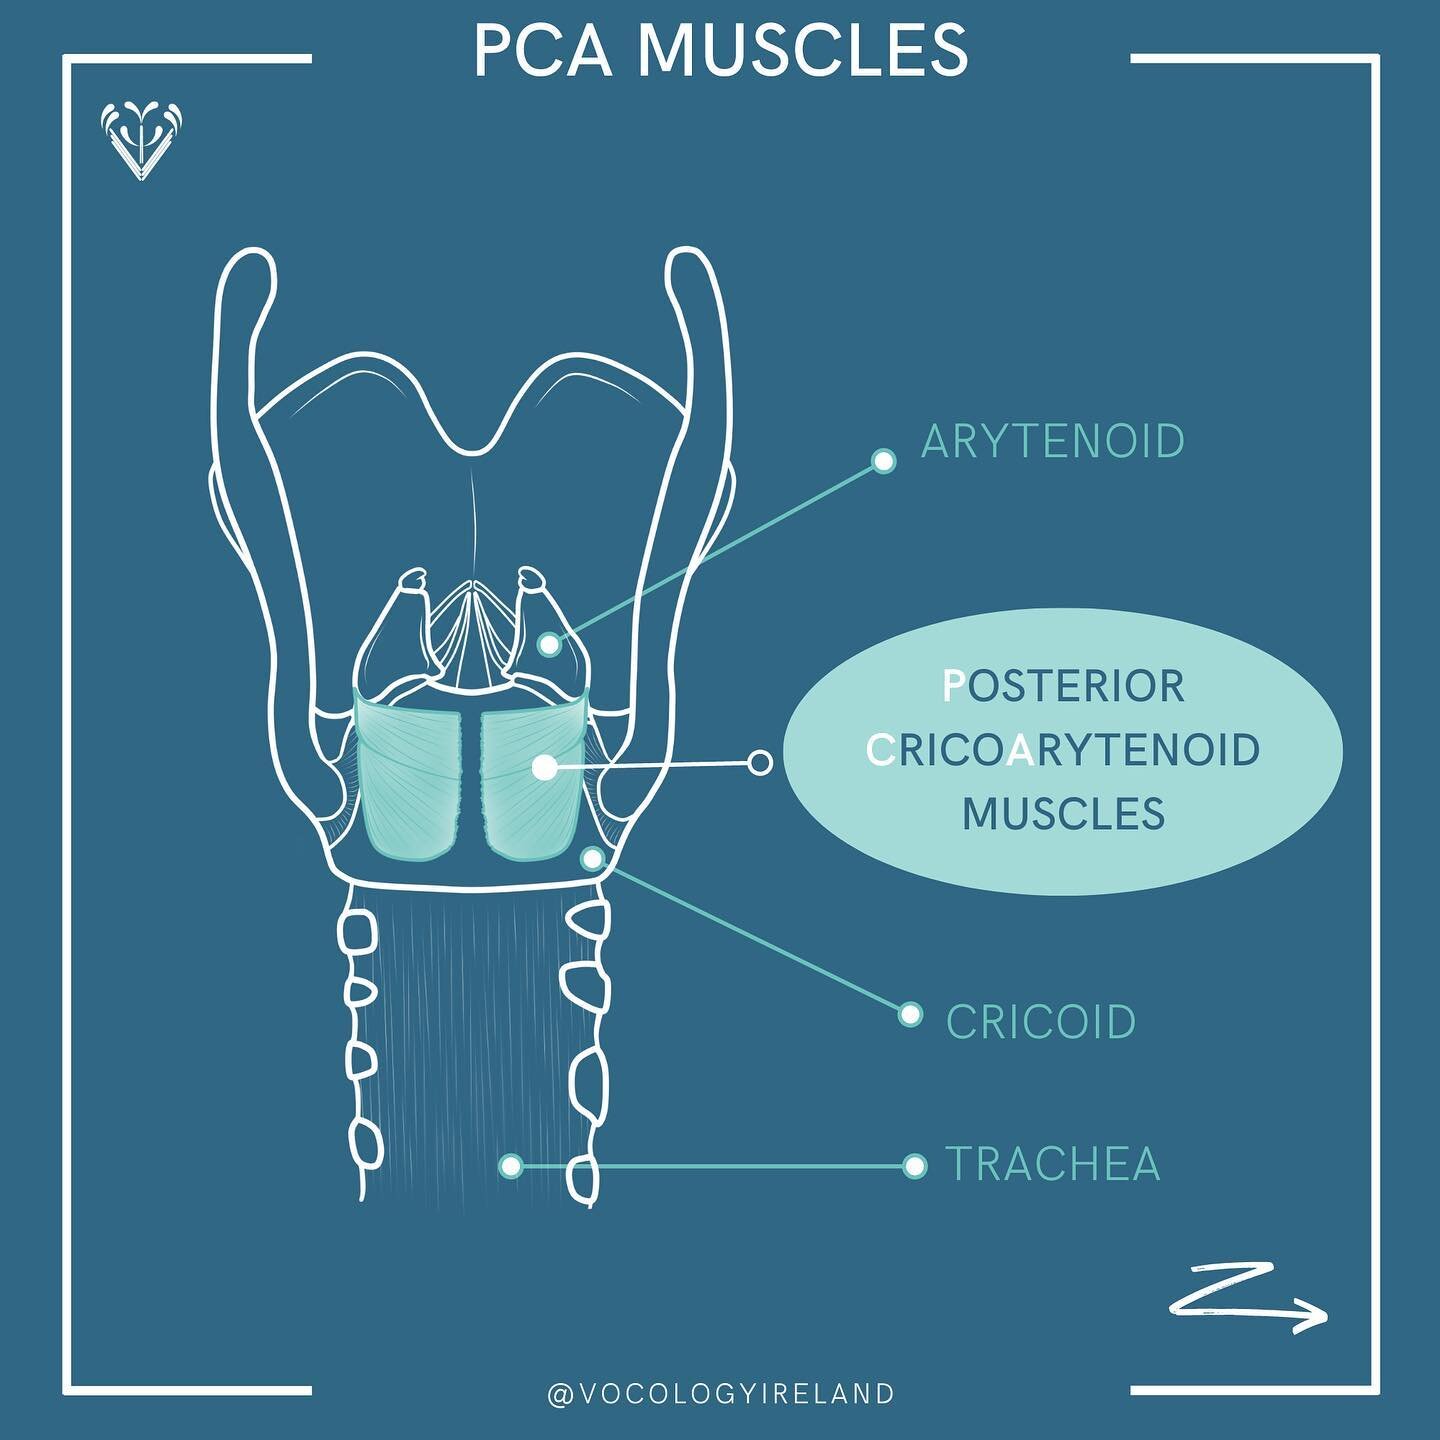 #AnatoMonday: PCA muscles!

Here we can see the posterior cricoarytenoid muscles shown from the back and swipe 👉 to see them from above 👀 

[Tl;dr: they abduct the vocal folds, allowing us to breathe 🥰]

They originate on the posterior surface (th